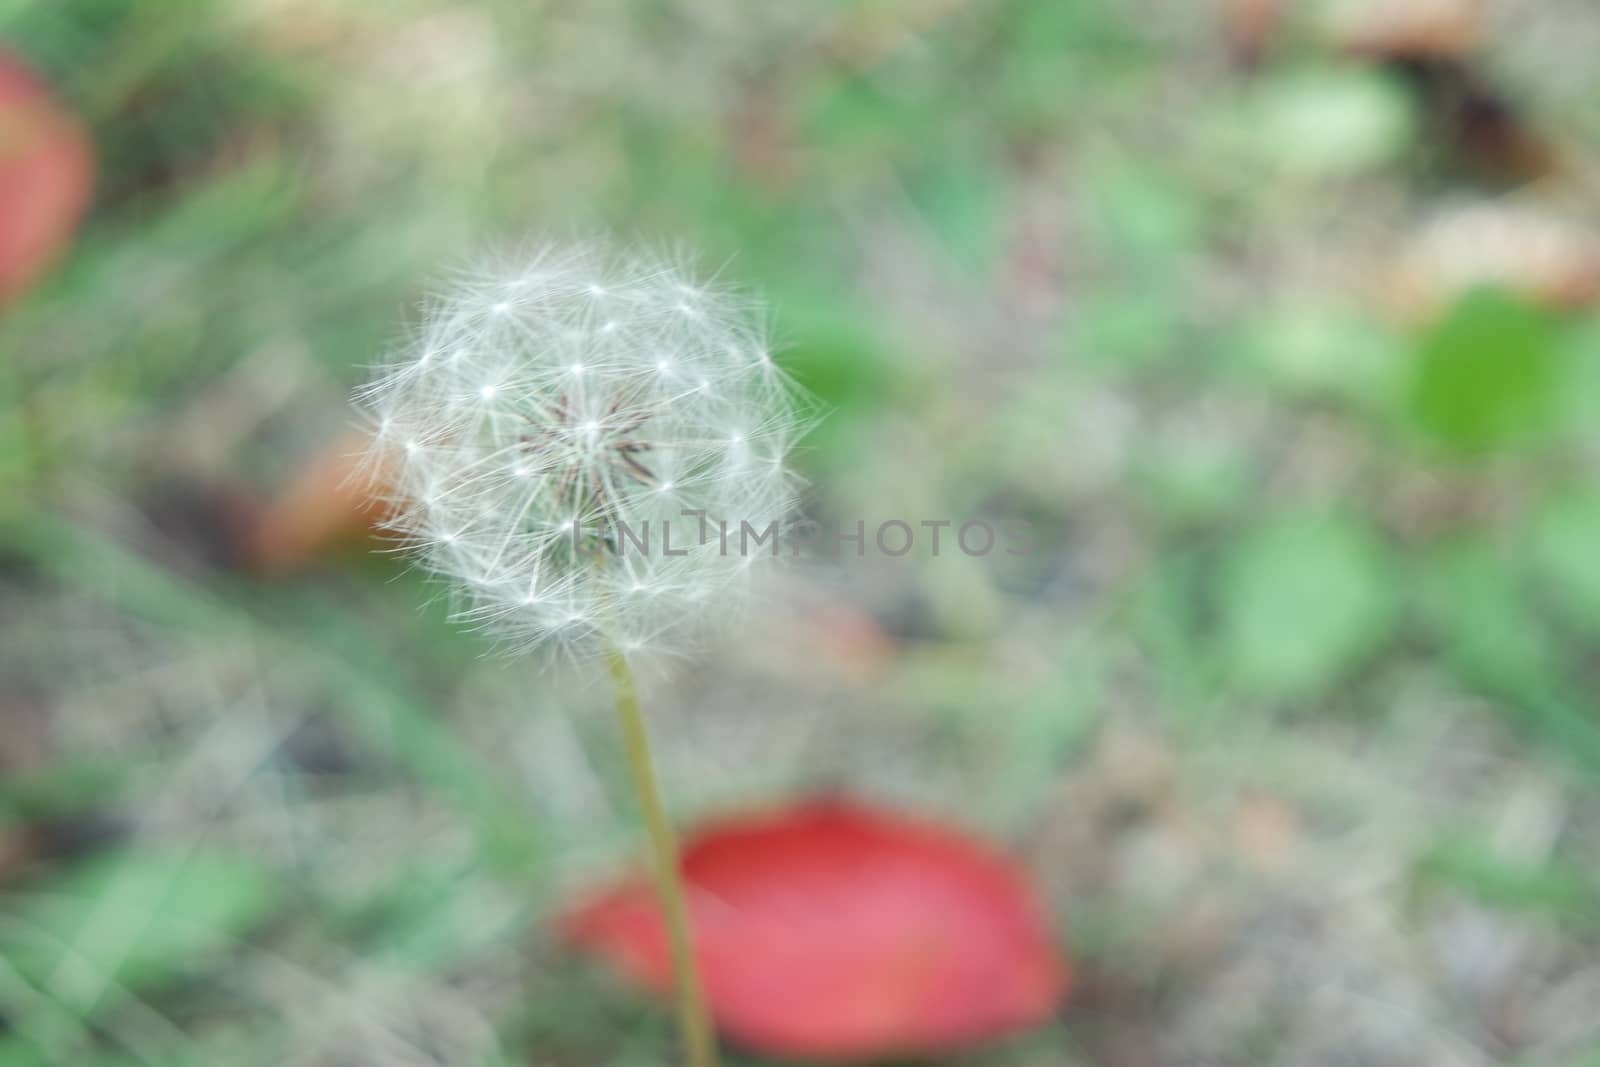 Delicate fluffy flower of dandelion selectively focused on a blurred green background. A closeup view